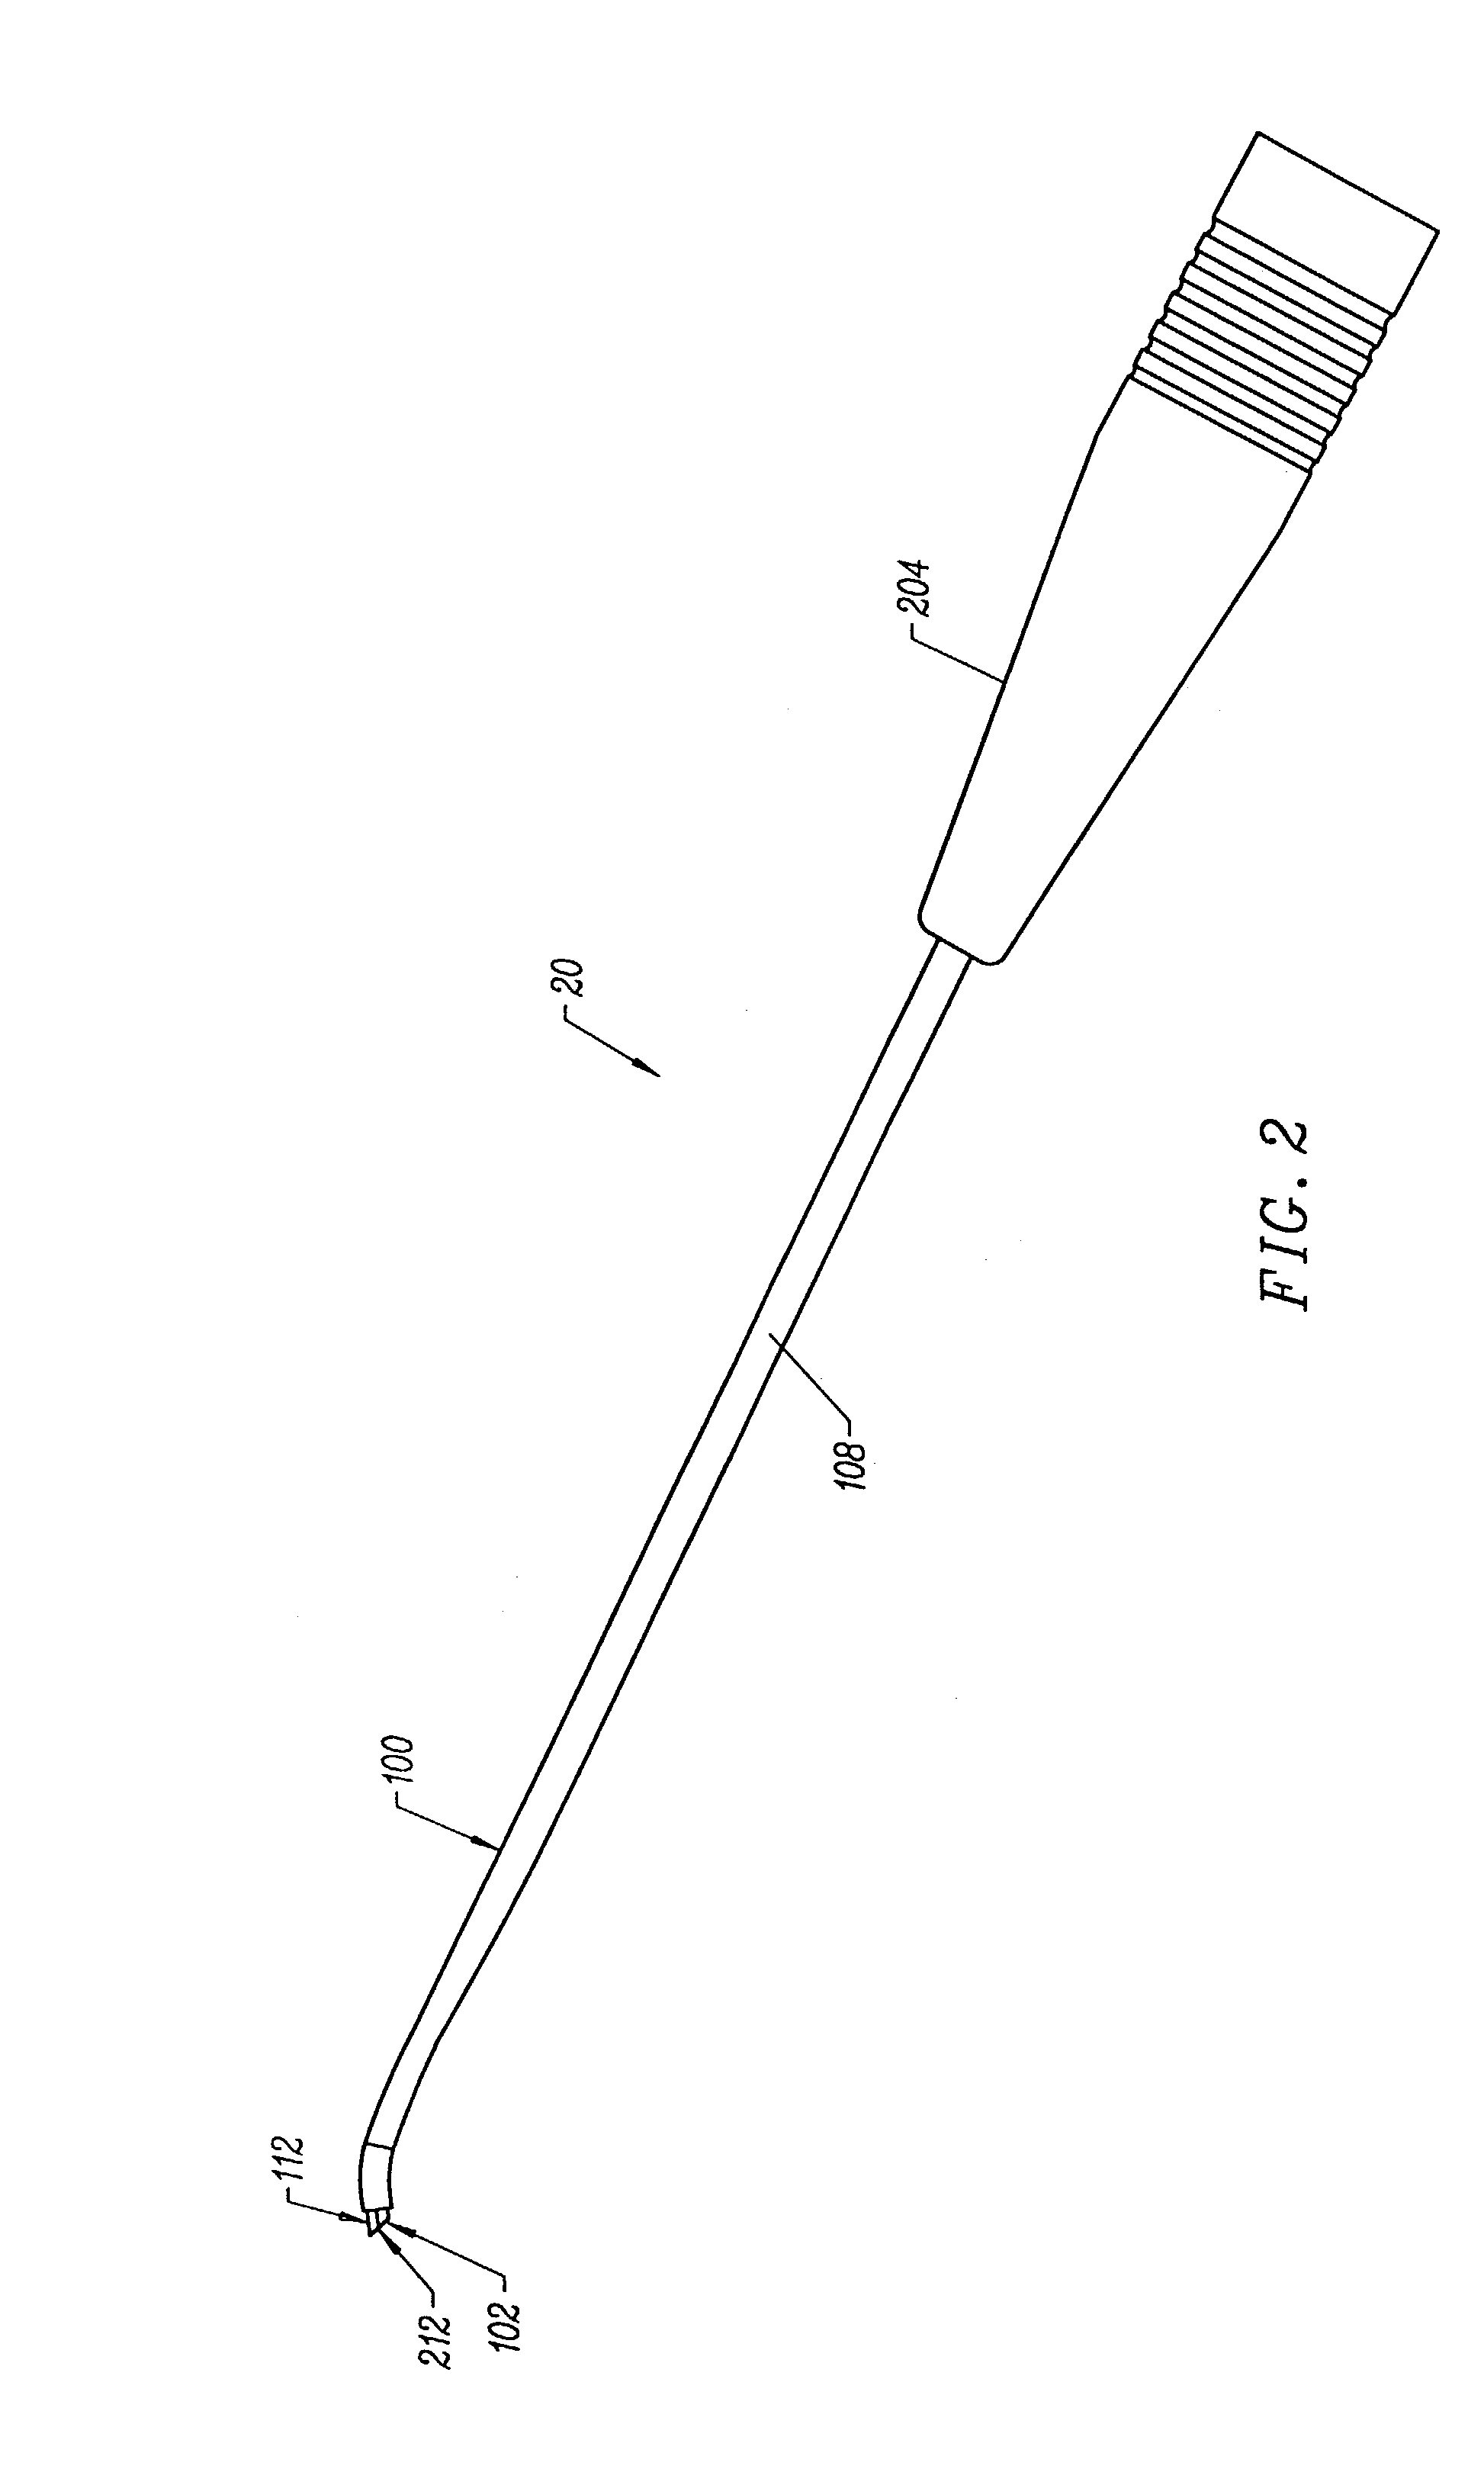 Systems and methods for electrosurgical tissue contraction